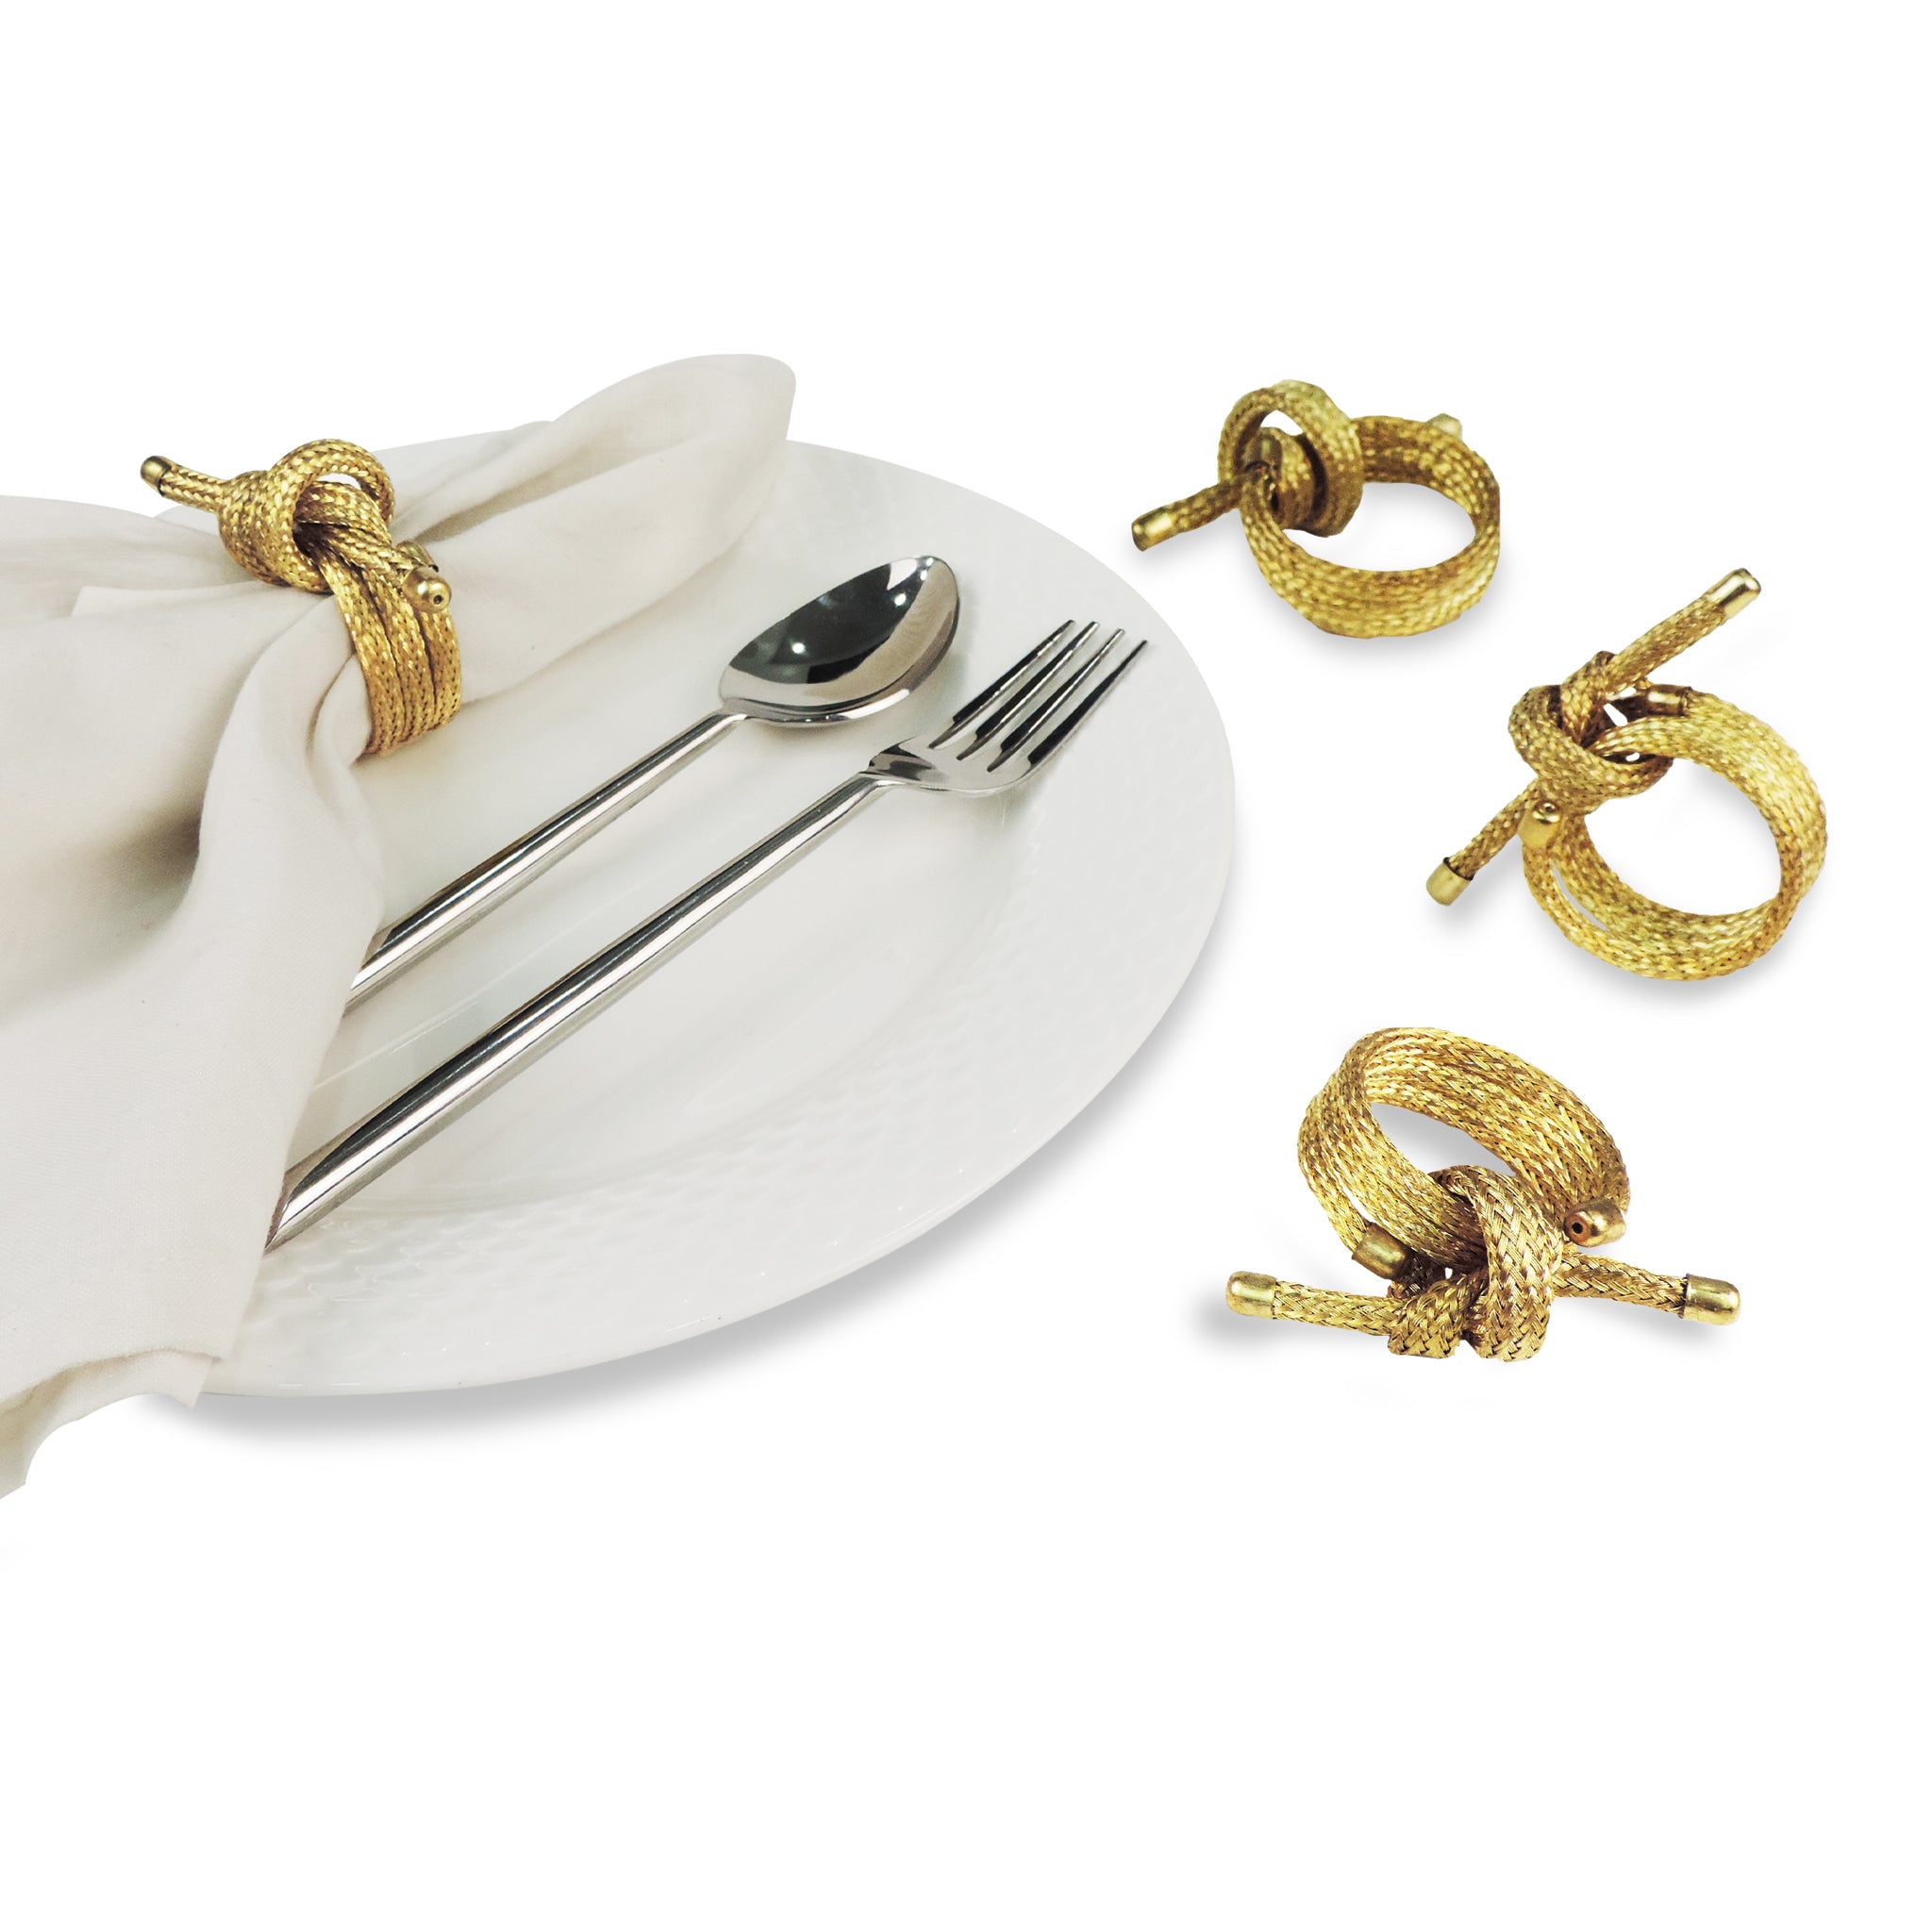 The 'Aueate' Place Setting for 4 - Placemats, Chargers, Napkin Rings & Table Runner